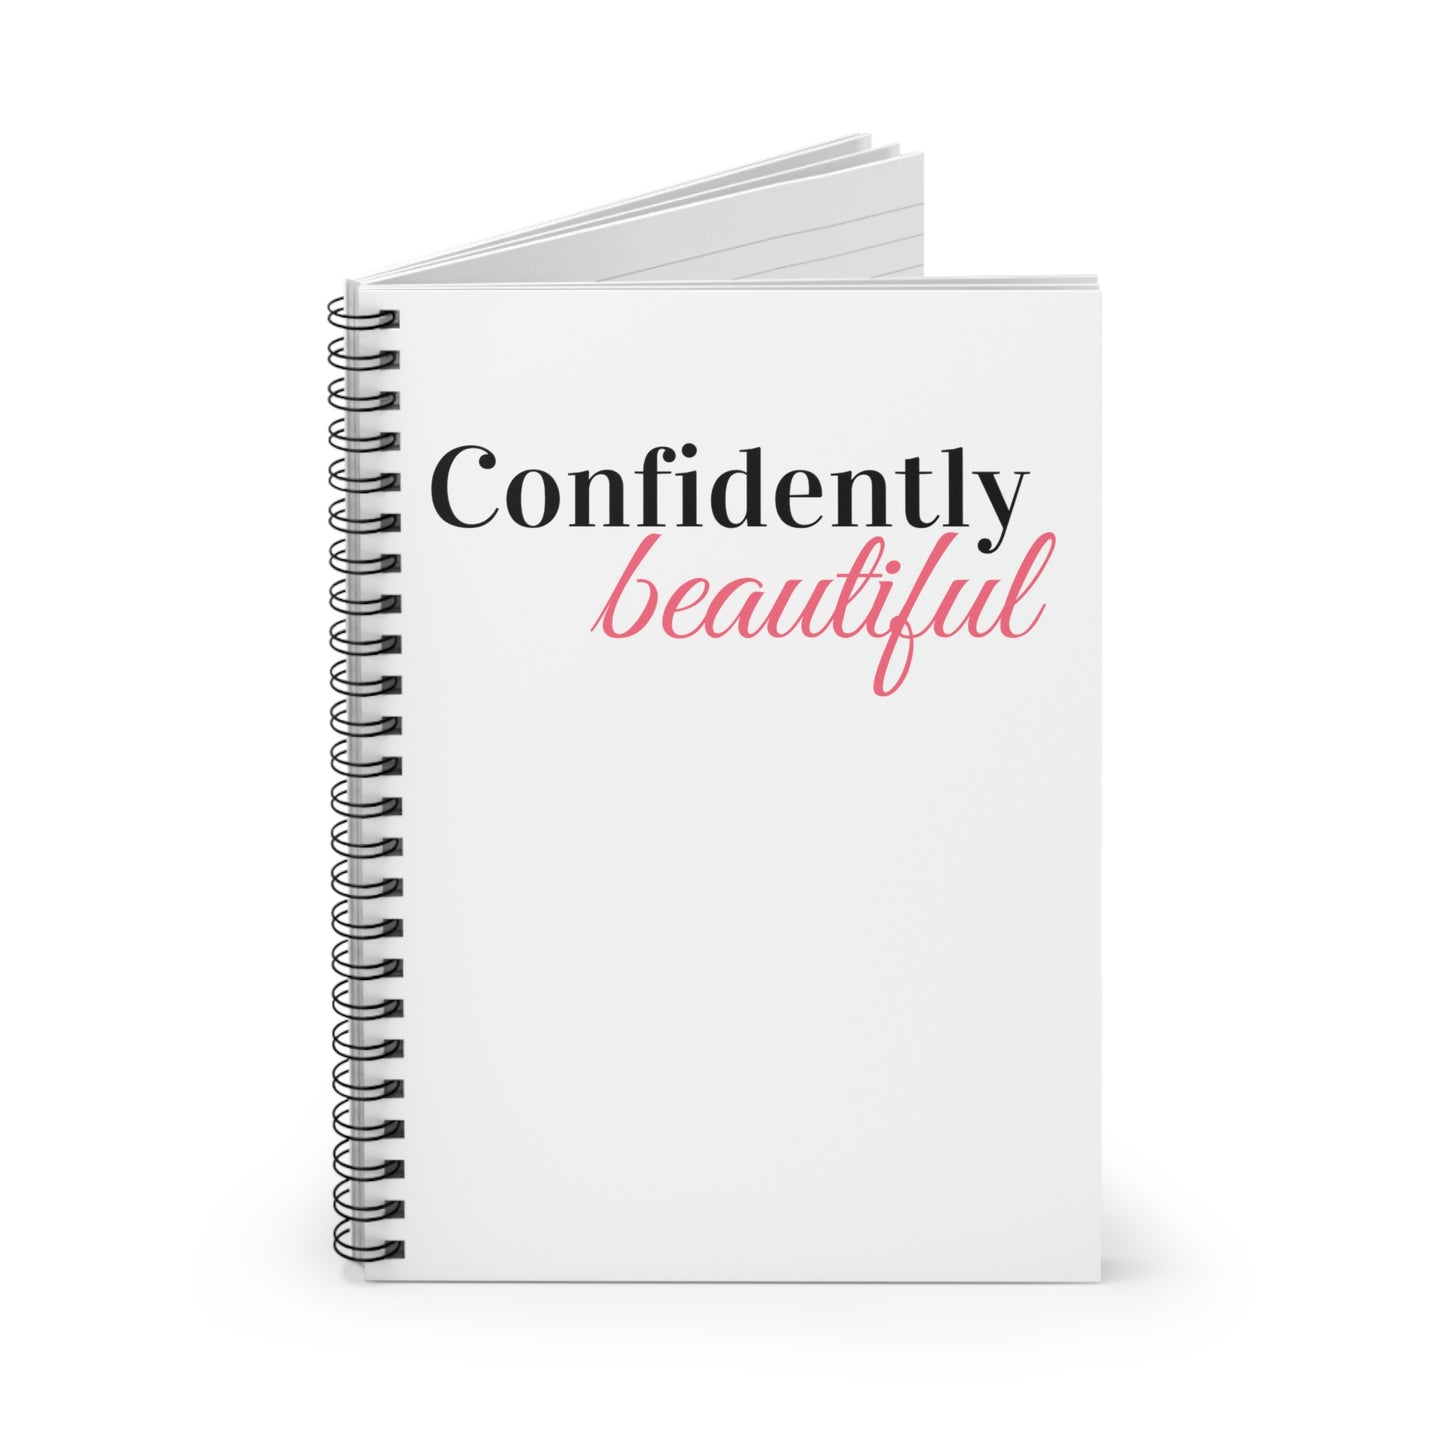 Confidently Beautiful Spiral Notebook